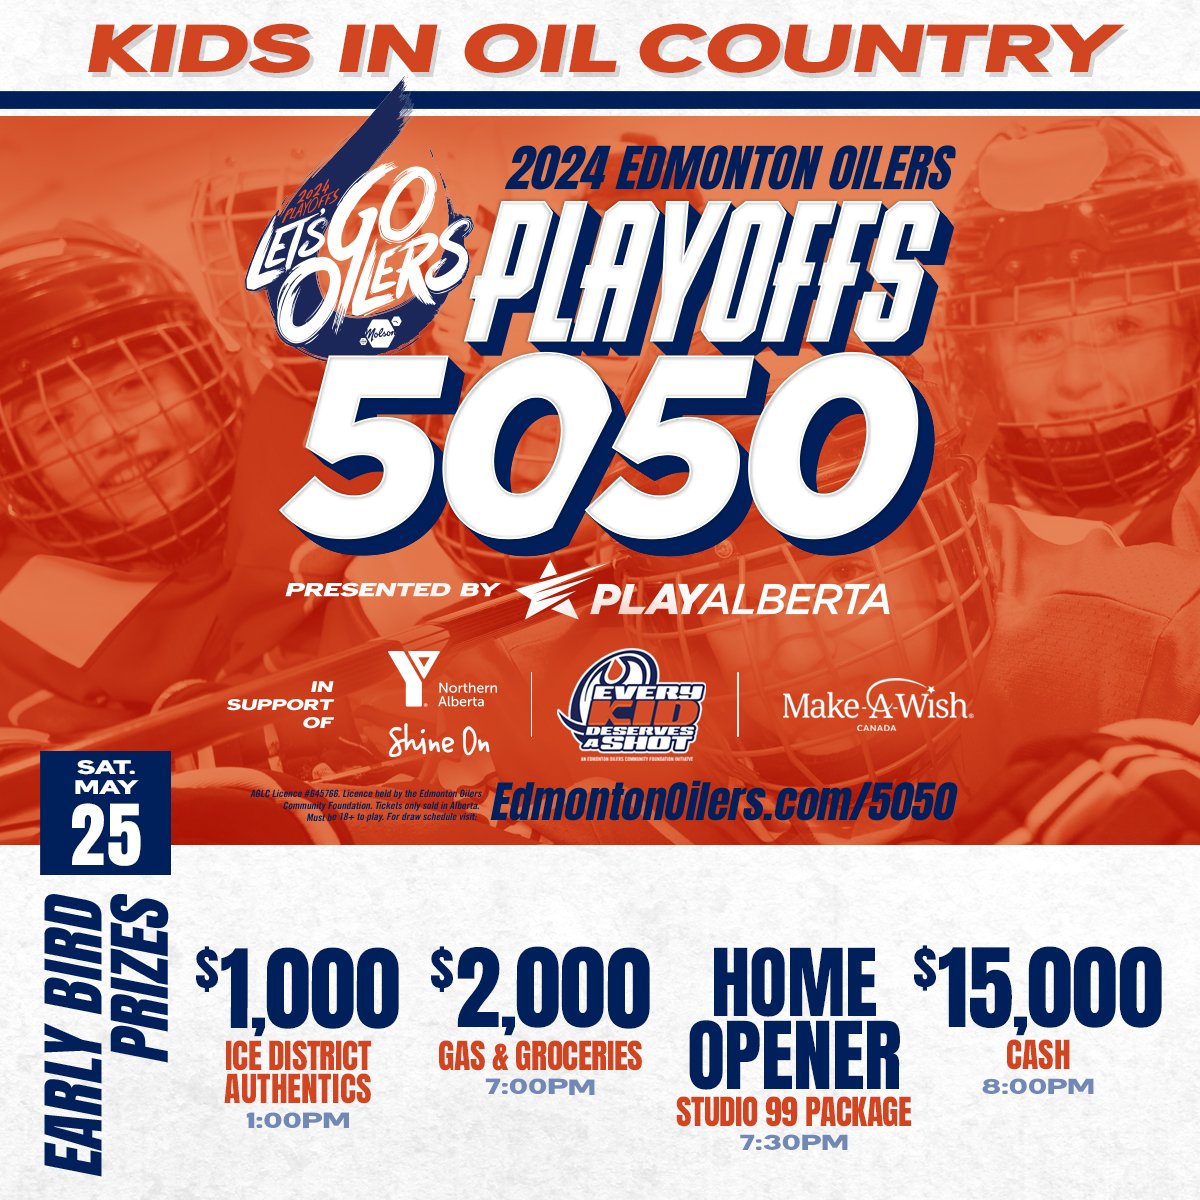 The Kids in Oil Country #Oilers Playoffs 50/50 continues today with more early-bird prizes including $15,000 cash & a grand prize jackpot that has surpassed $1 million as we support @YMCAEdm, @MakeAWishNAB & the EOCF's Every Kid Deserves a Shot! 🎟 EdmontonOilers.com/5050tw